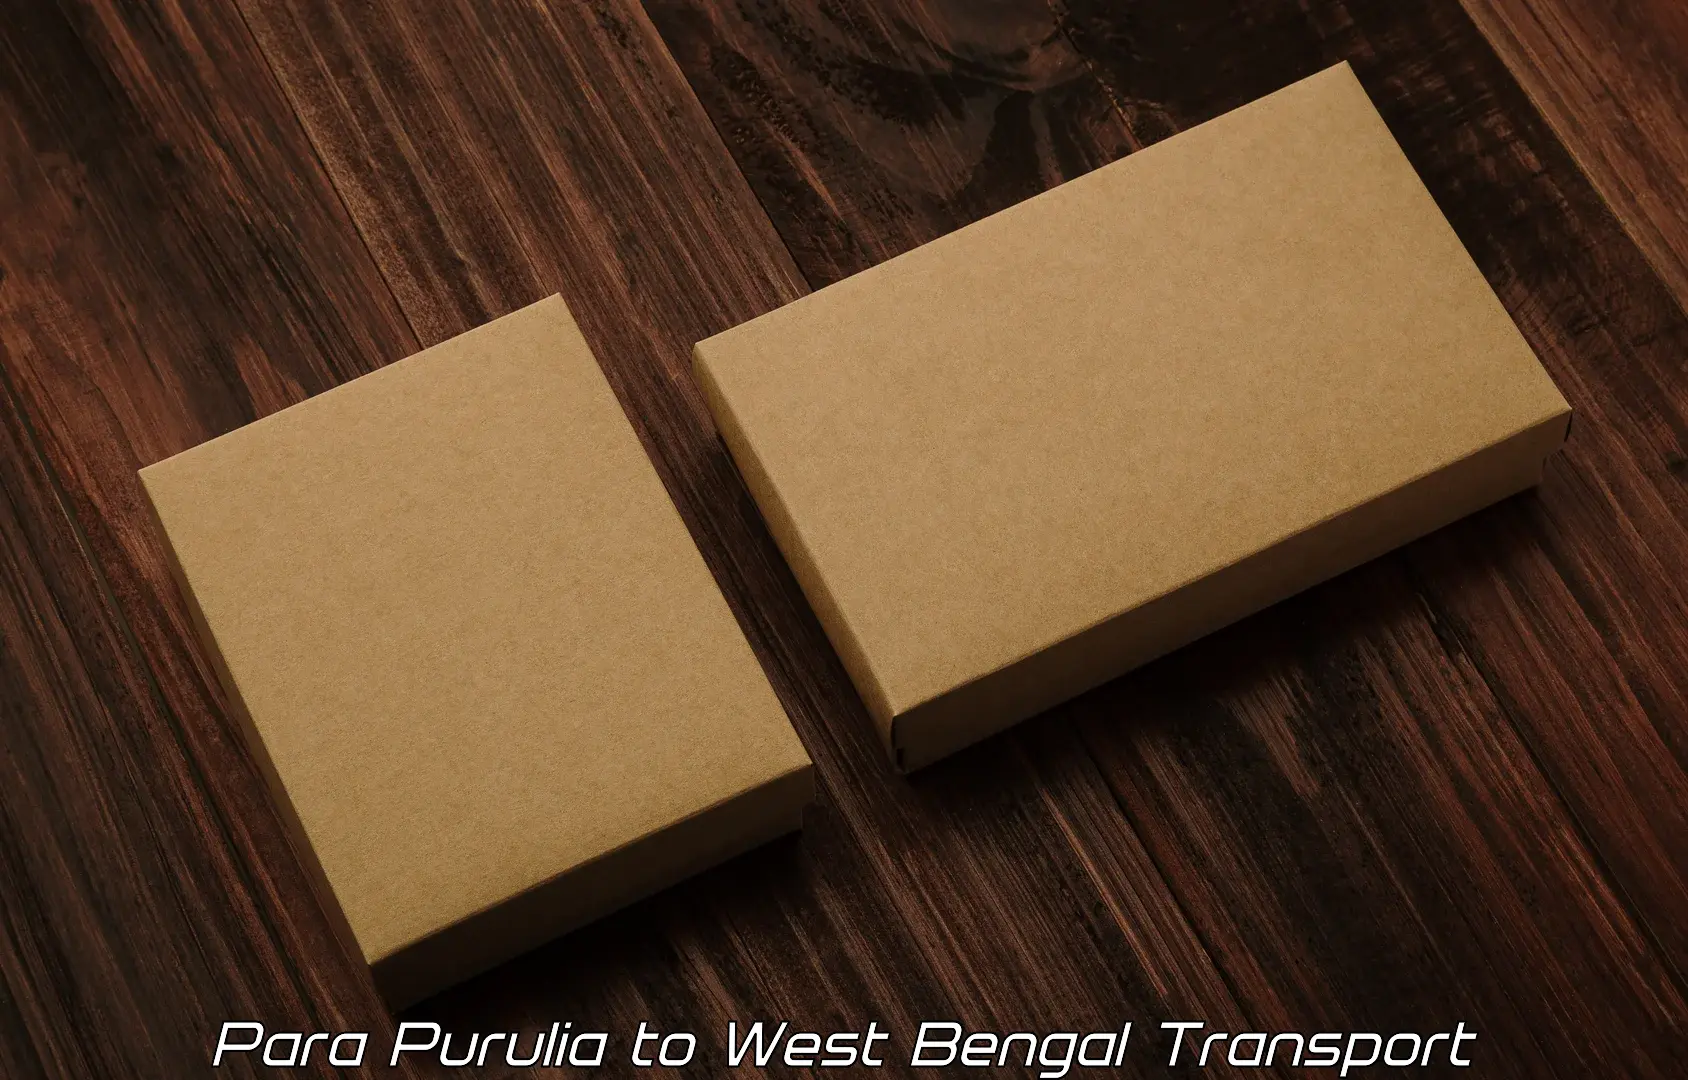 Two wheeler parcel service in Para Purulia to Dubrajpur